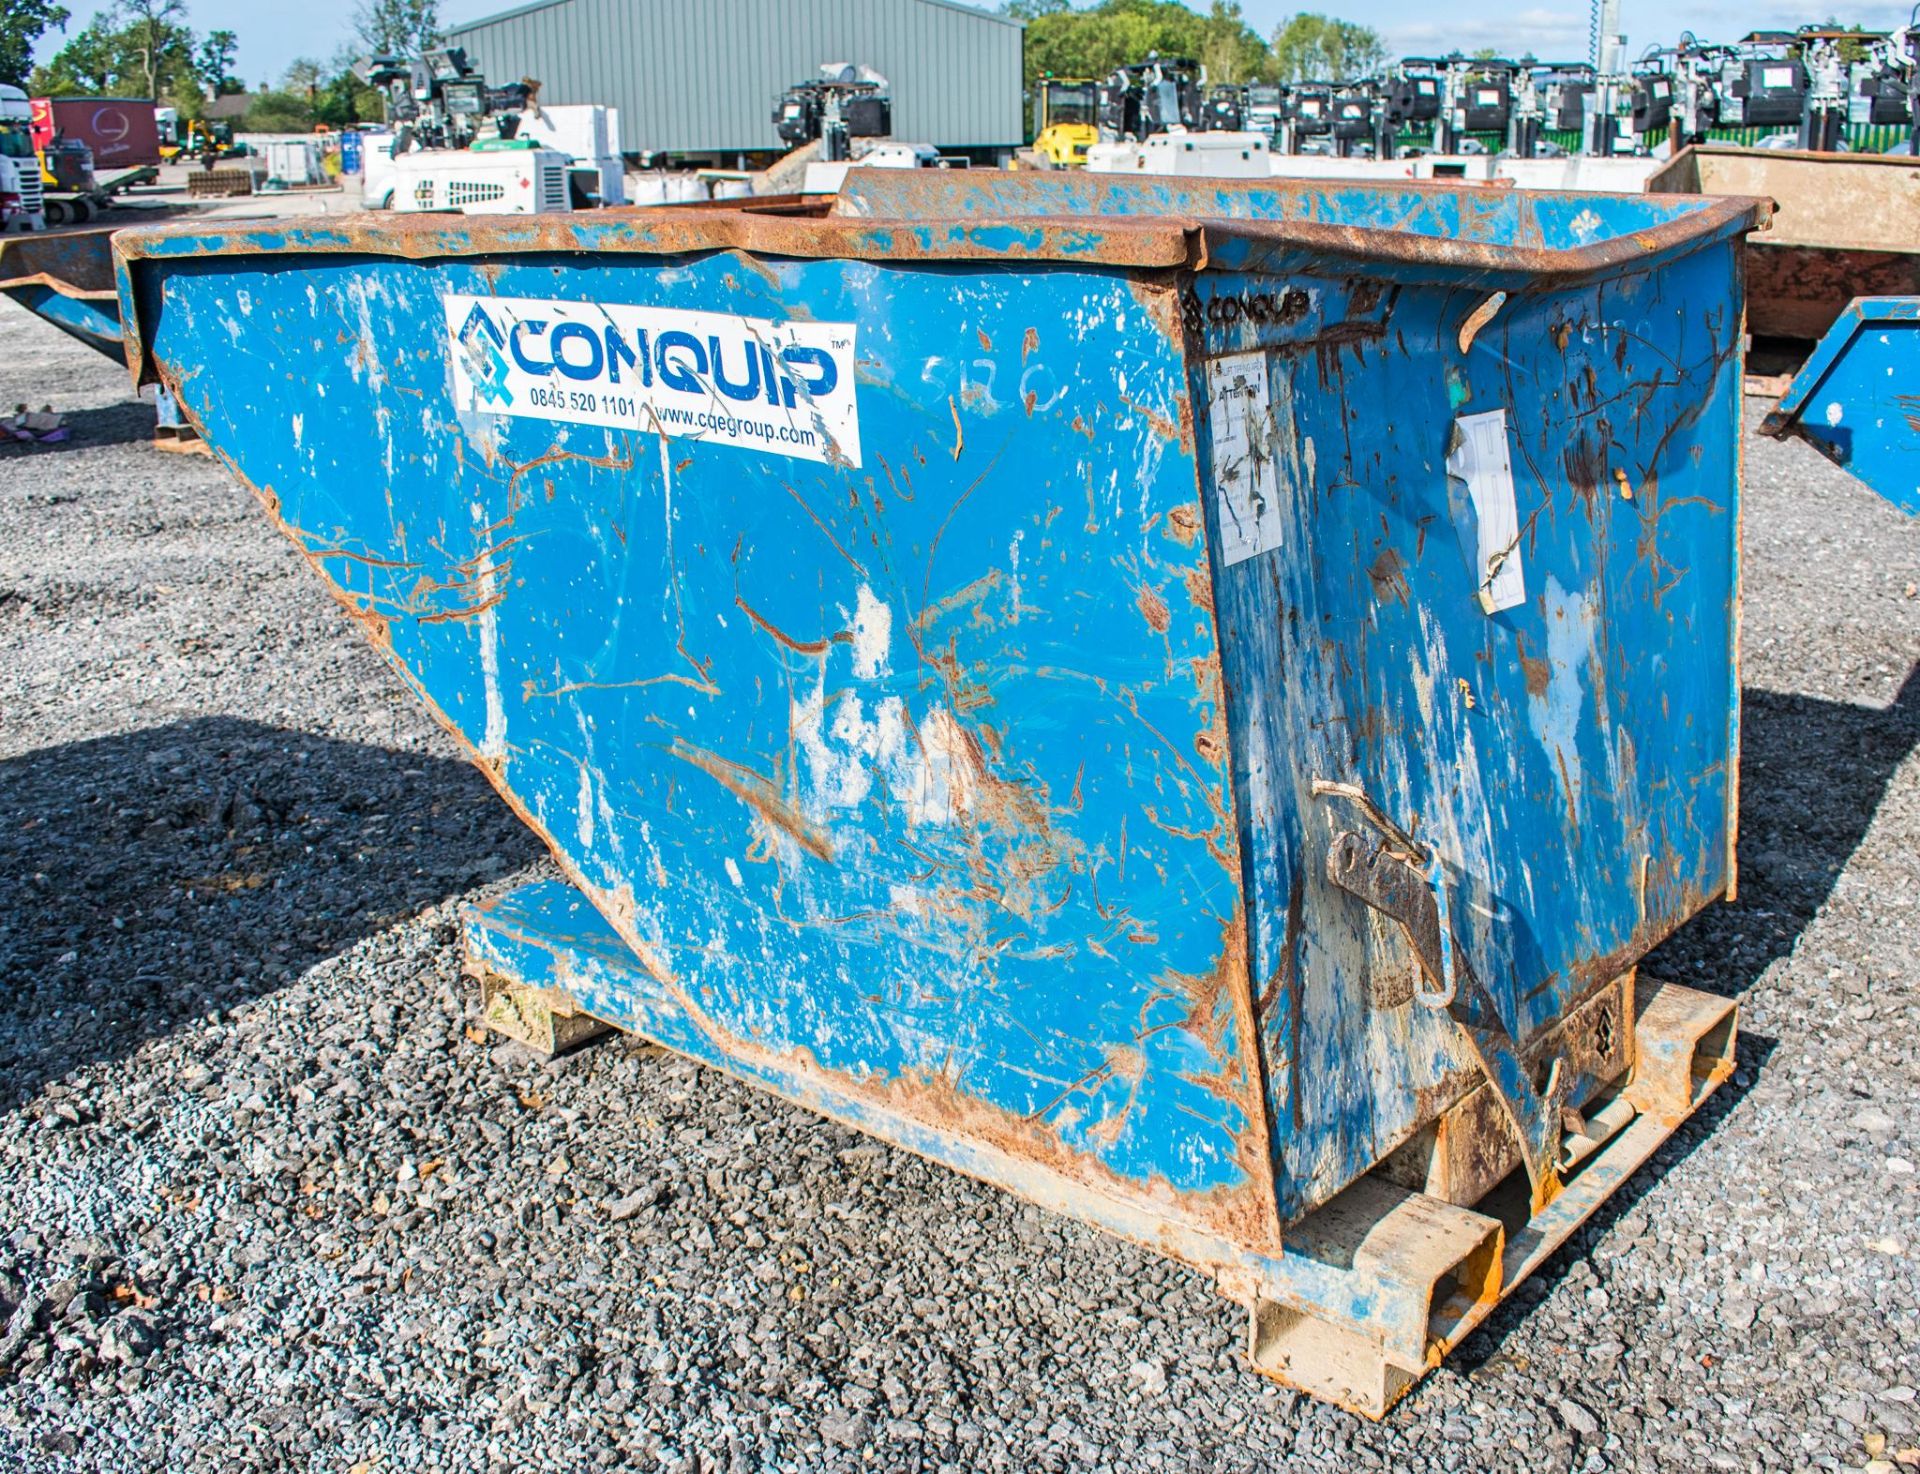 Conquip tipping skip - Image 2 of 2